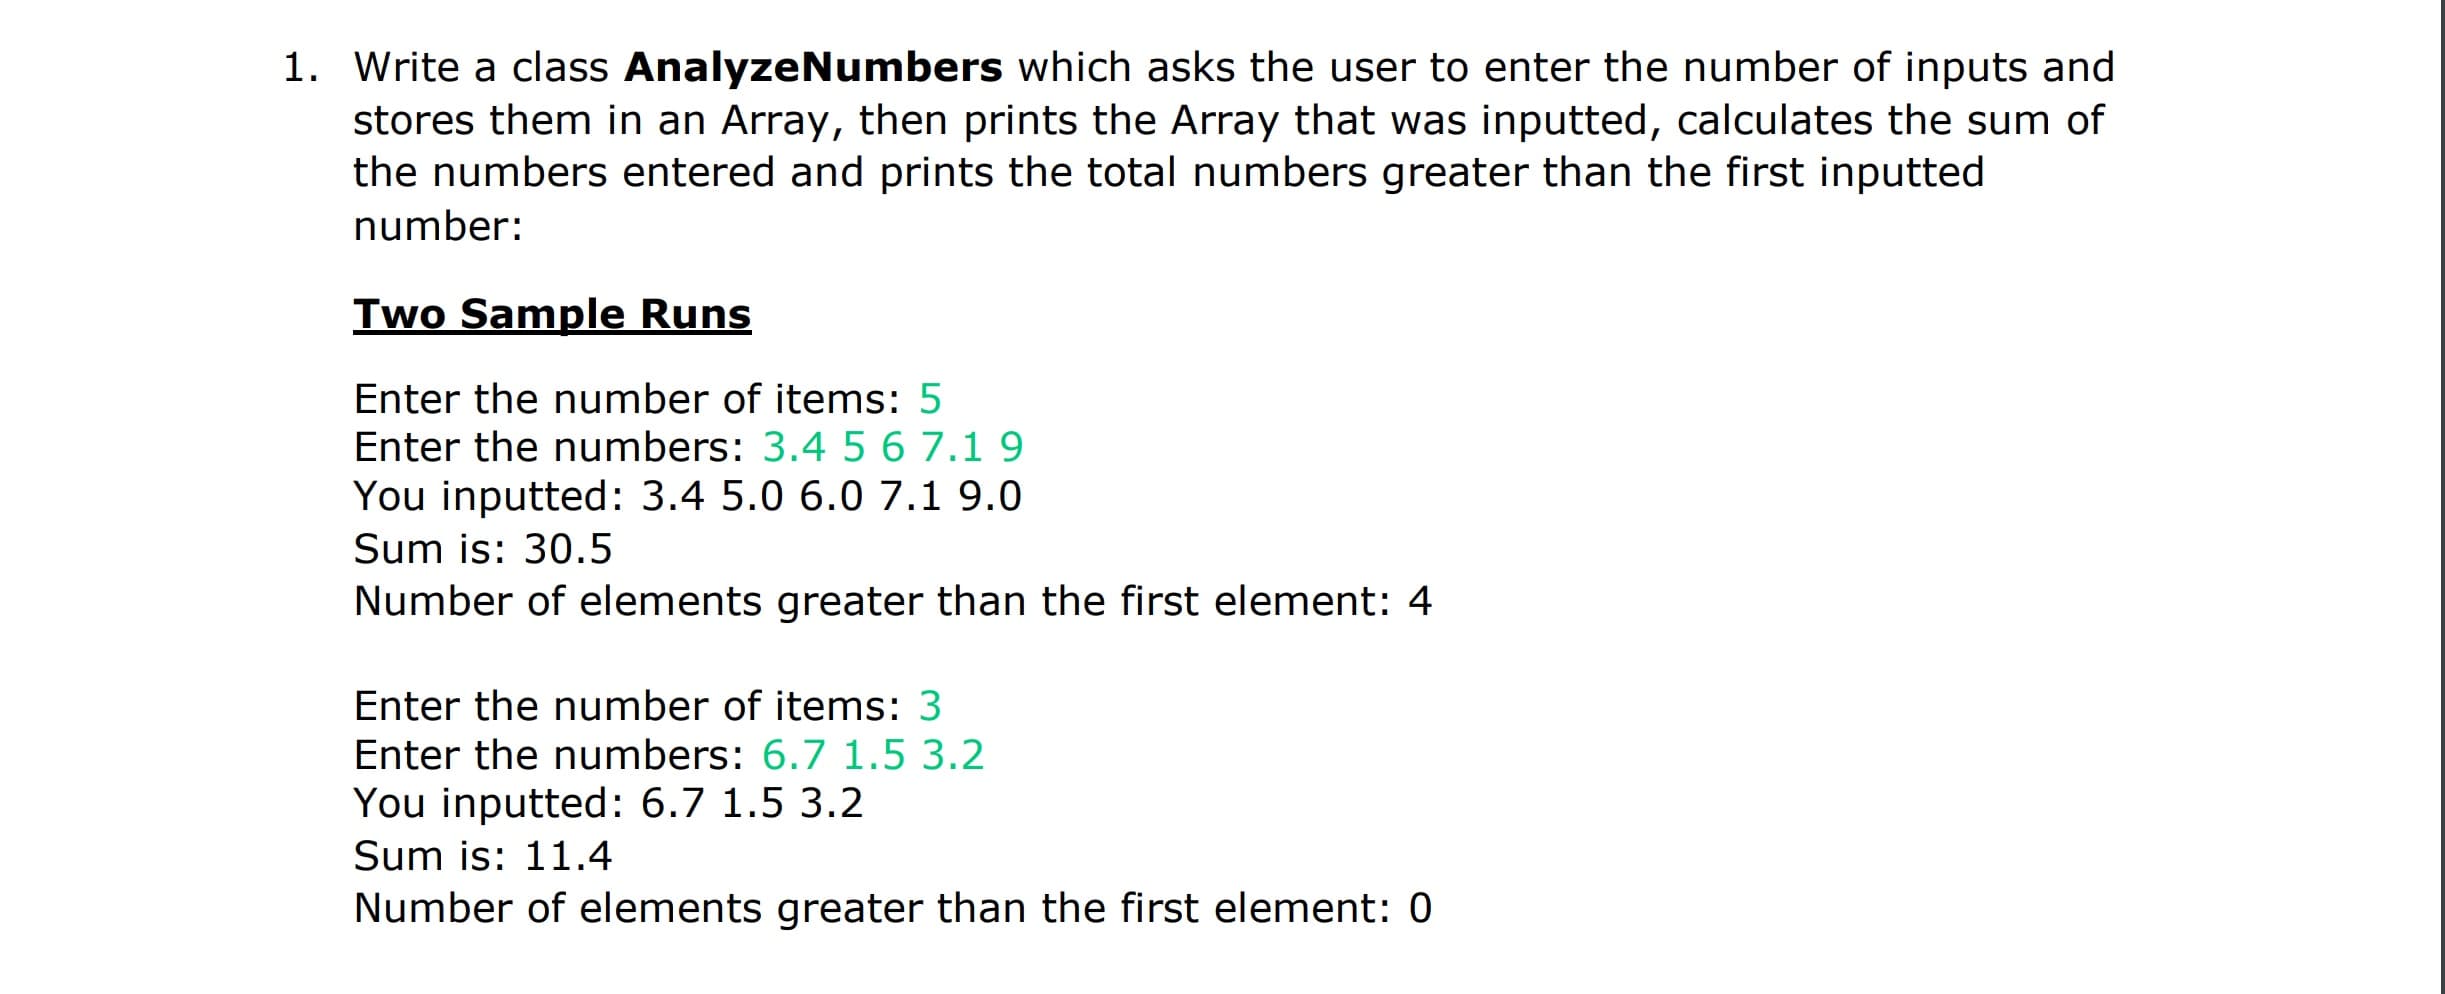 1. Write a class AnalyzeNumbers which asks the user to enter the number of inputs and
stores them in an Array, then prints the Array that was inputted, calculates the sum of
the numbers entered and prints the total numbers greater than the first inputted
number:
Iwo Sample Runs
Enter the number of items: 5
Enter the numbers: 3.4 56 7.19
You inputted: 3.4 5.0 6.0 7.1 9.0
Sum is: 30.5
Number of elements greater than the first element: 4
Enter the number of items: 3
Enter the numbers: 6.7 1.5 3.2
You inputted: 6.7 1.5 3.2
Sum is: 11.4
Number of elements greater than the first element: 0
